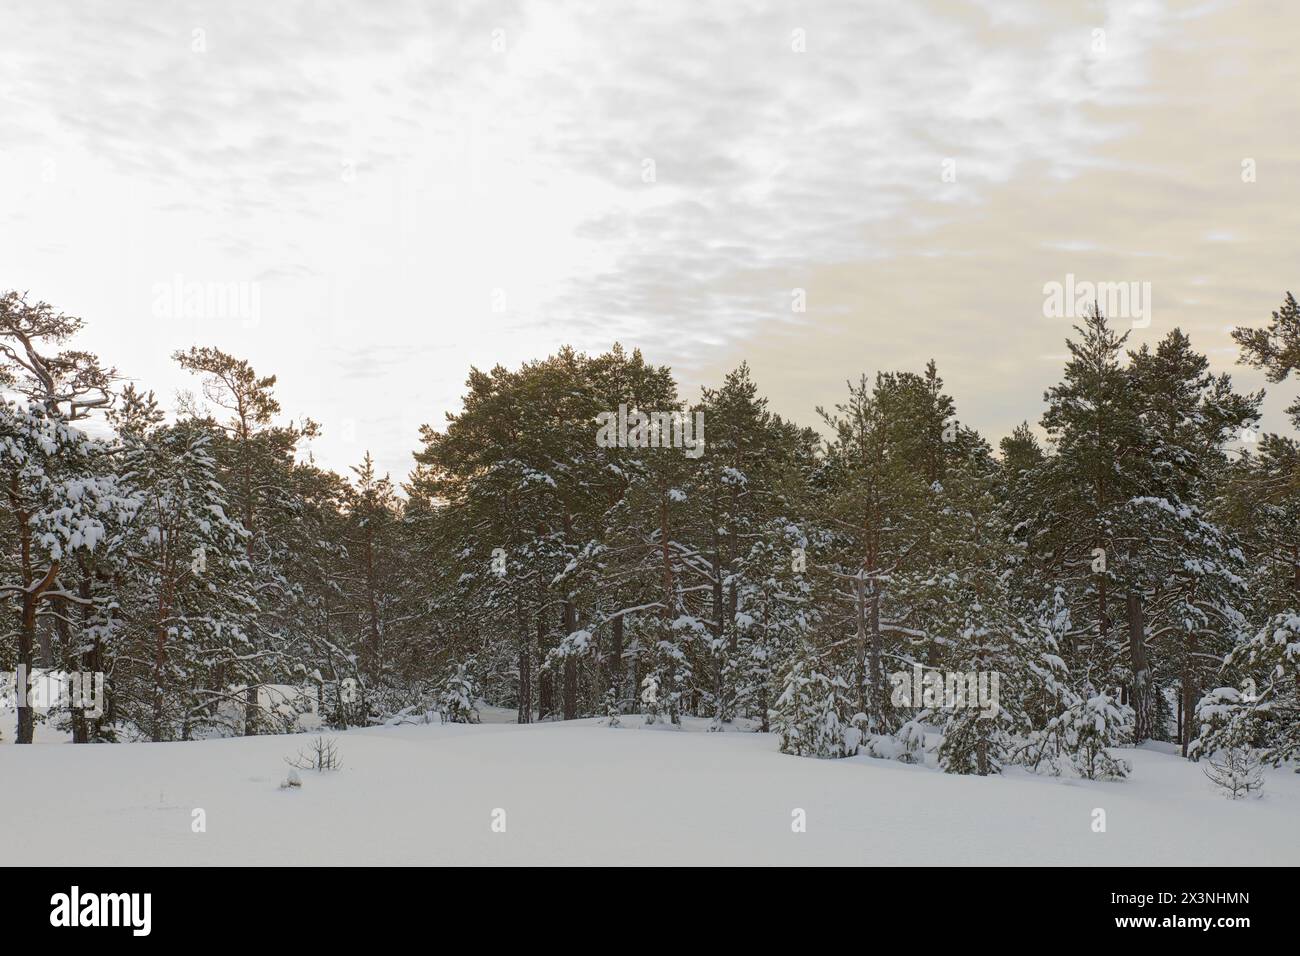 Winter landscape view of forest covered in snow with clouds in the sky, Porkkalanniemi, Kirkkonummi, Finland. Stock Photo